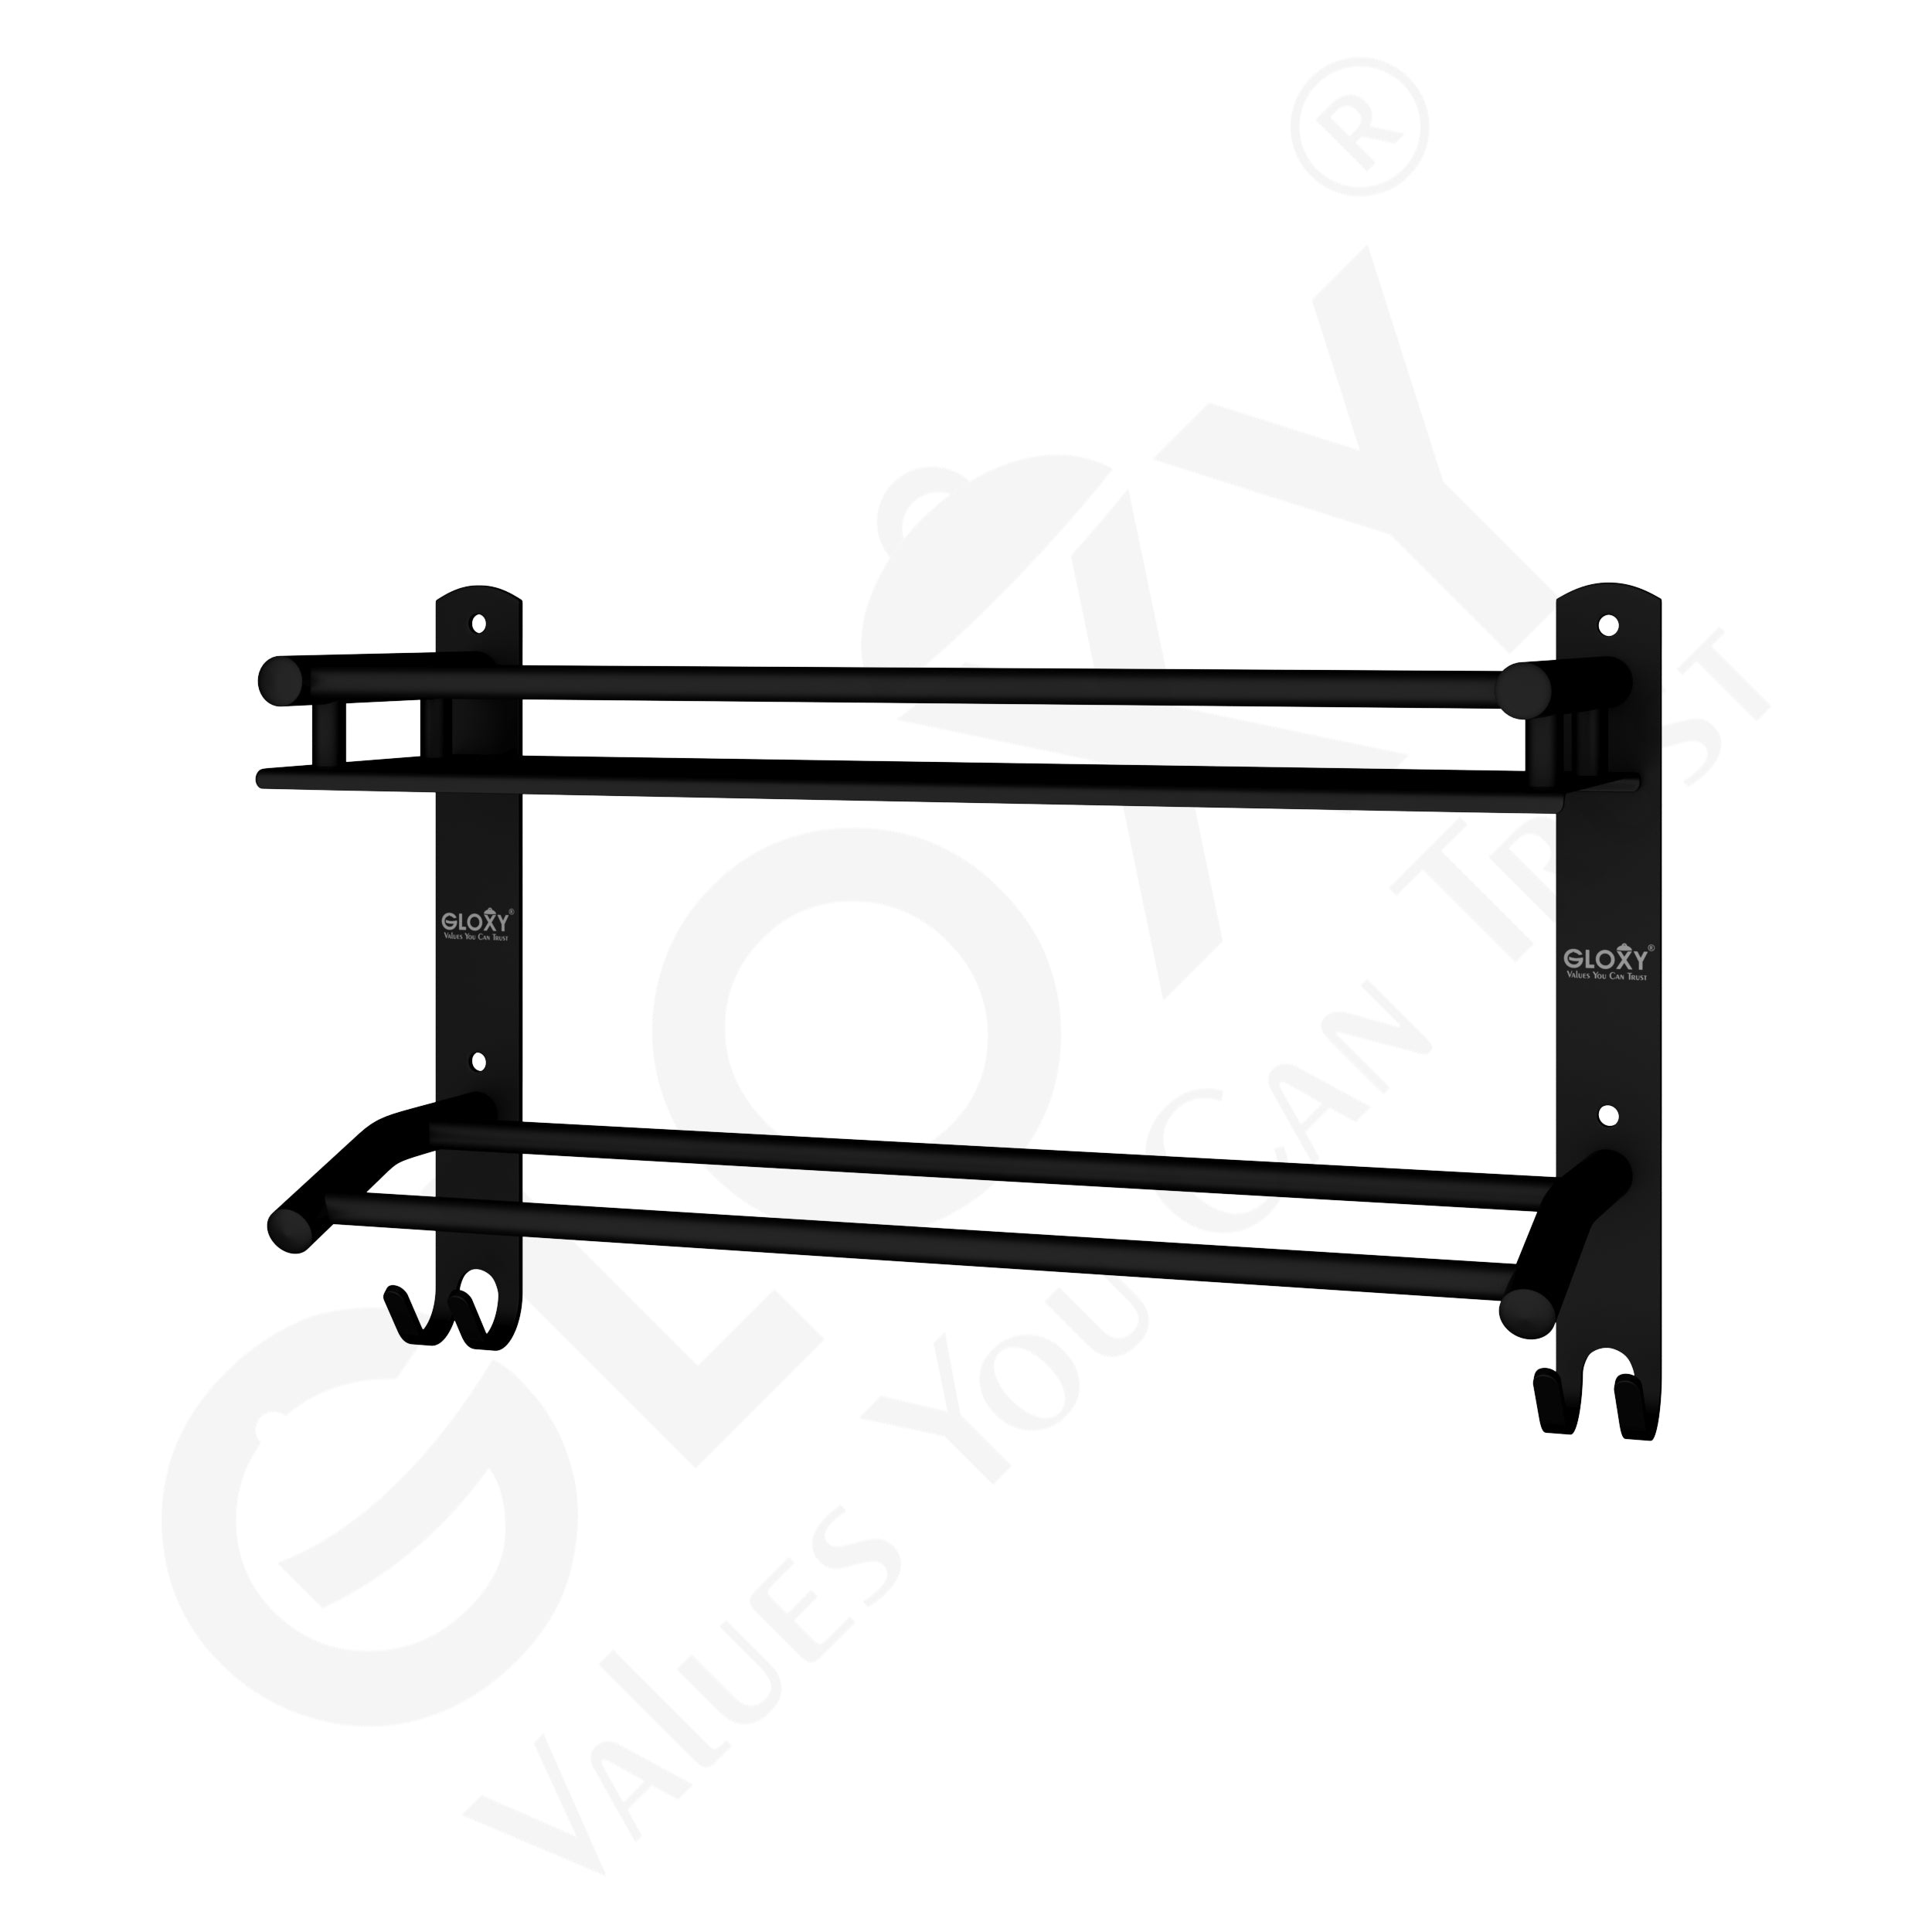 Black Matte Wall Mount Stainless Steel Shelf with Towel Holder